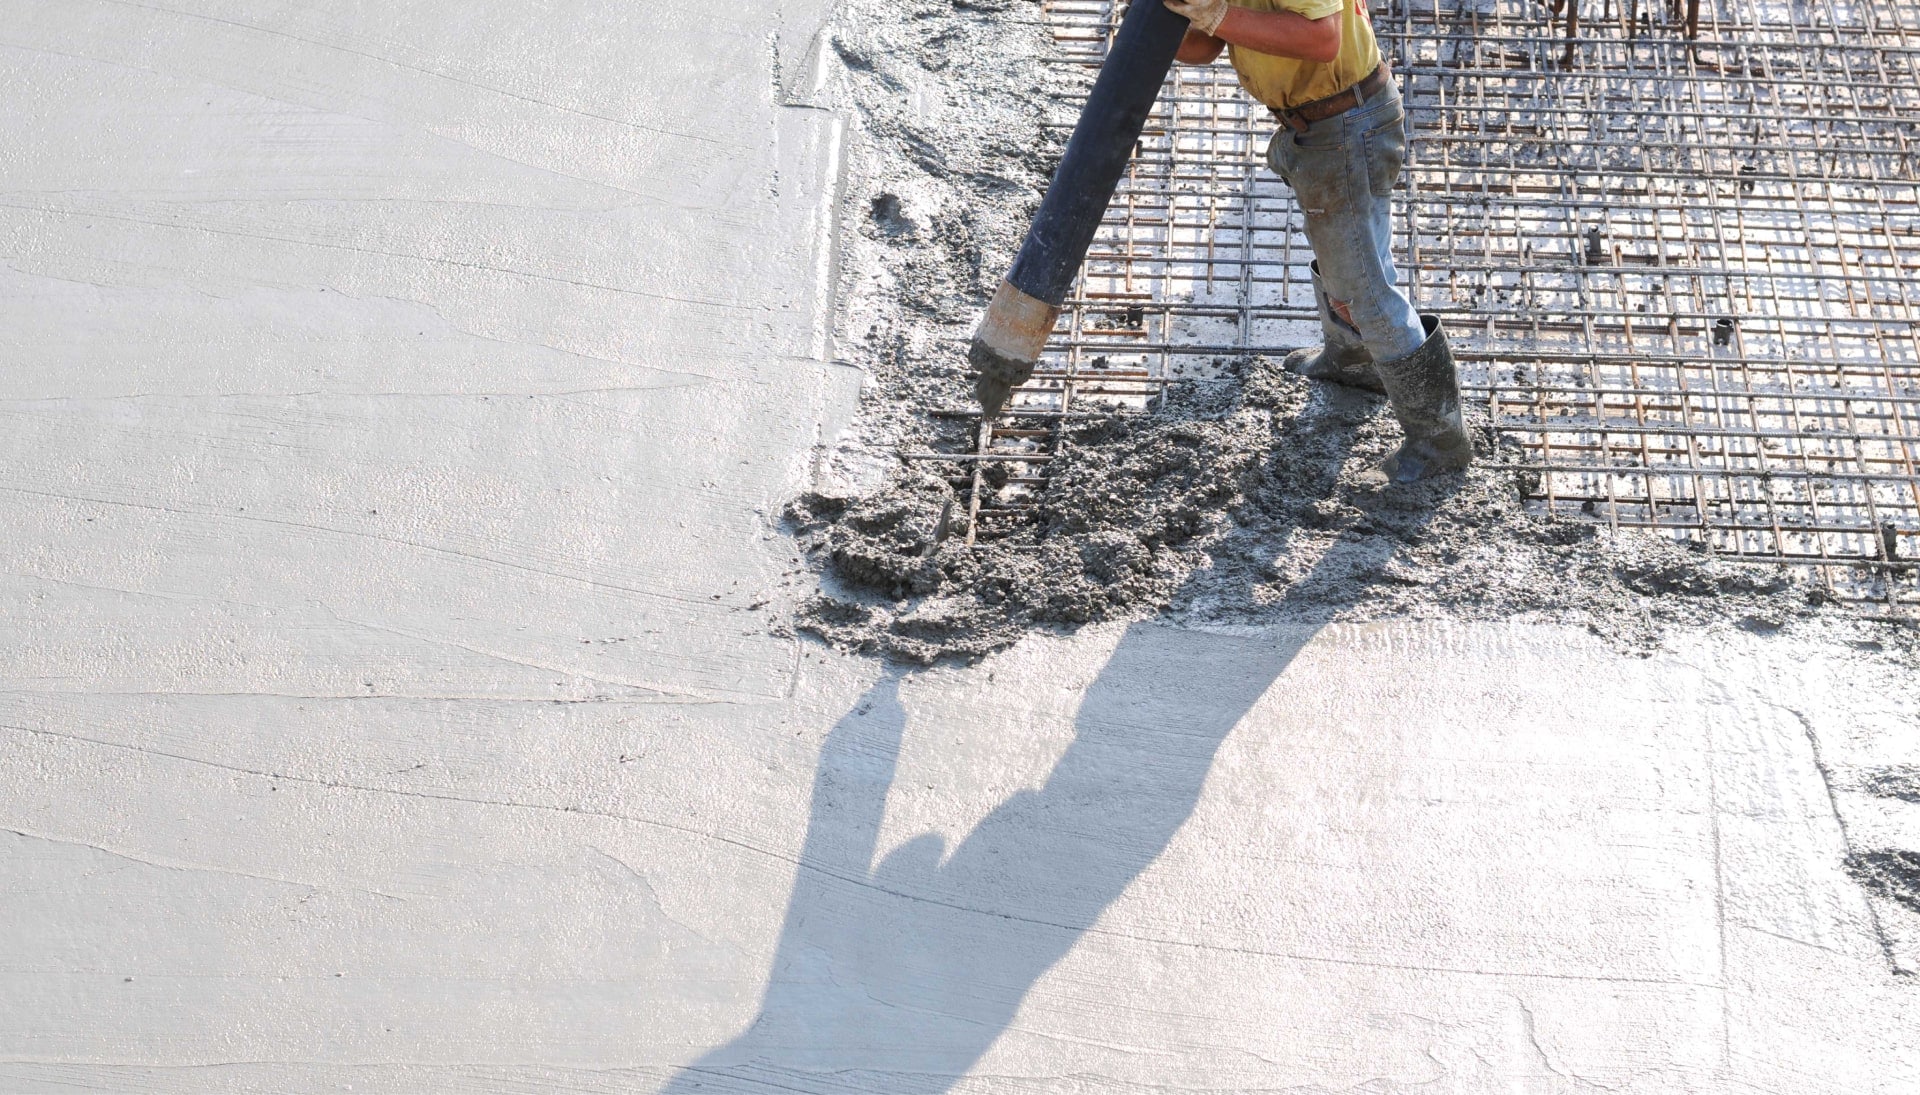 High-Quality Concrete Foundation Services El Paso Trust Experienced Contractors for Strong Concrete Foundations for Residential or Commercial Projects.